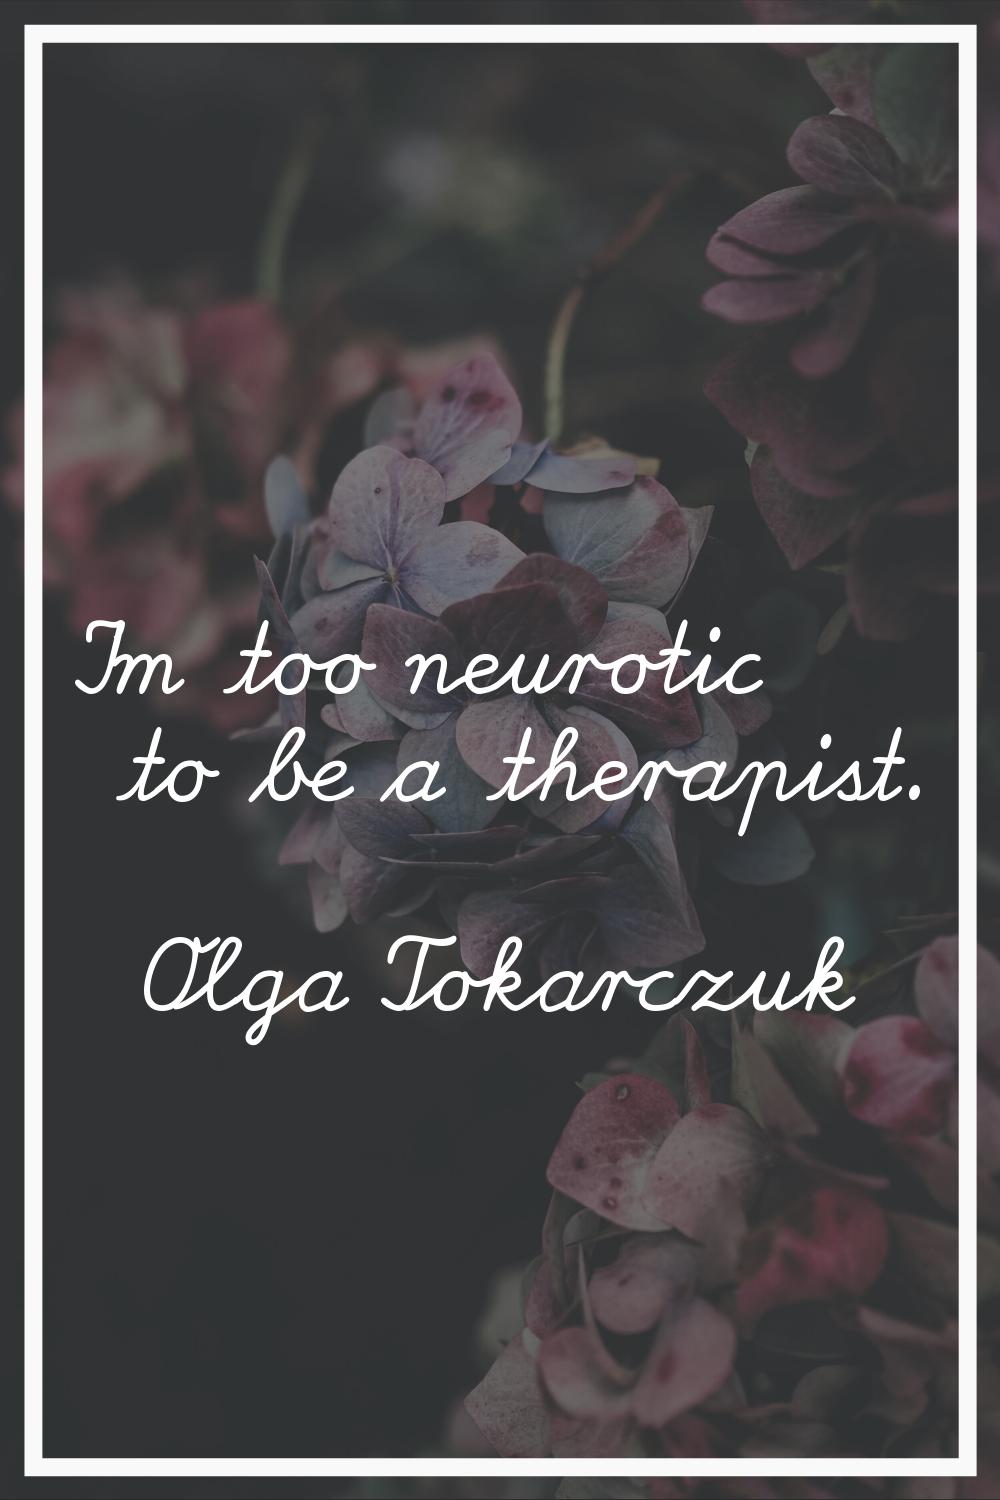 I'm too neurotic to be a therapist.